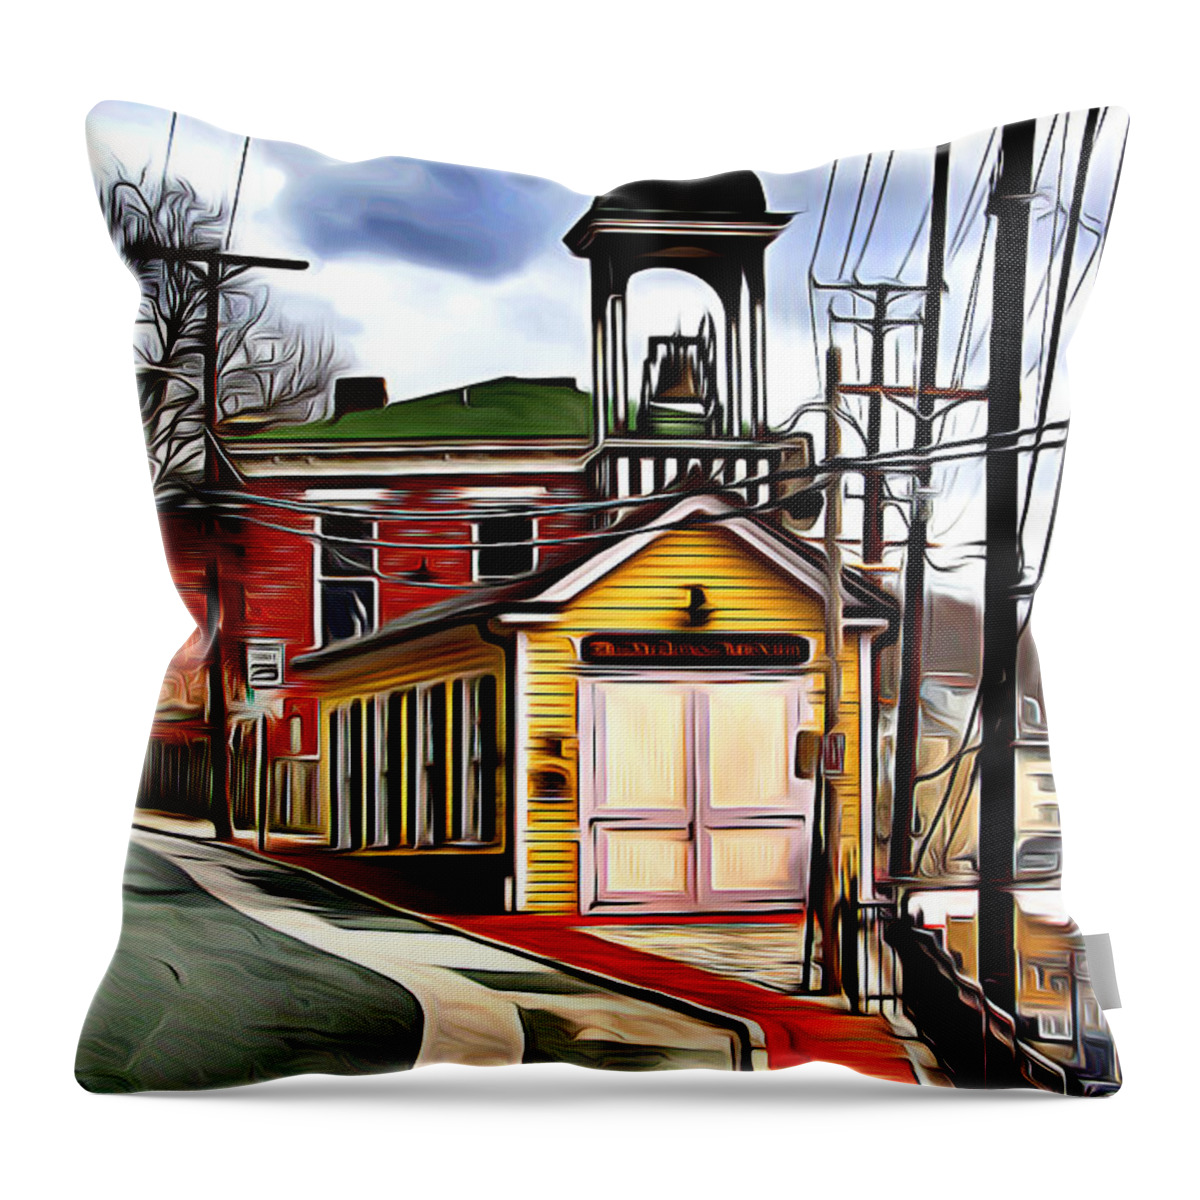 Ellicott Throw Pillow featuring the digital art Ellicott City Fire Museum by Stephen Younts